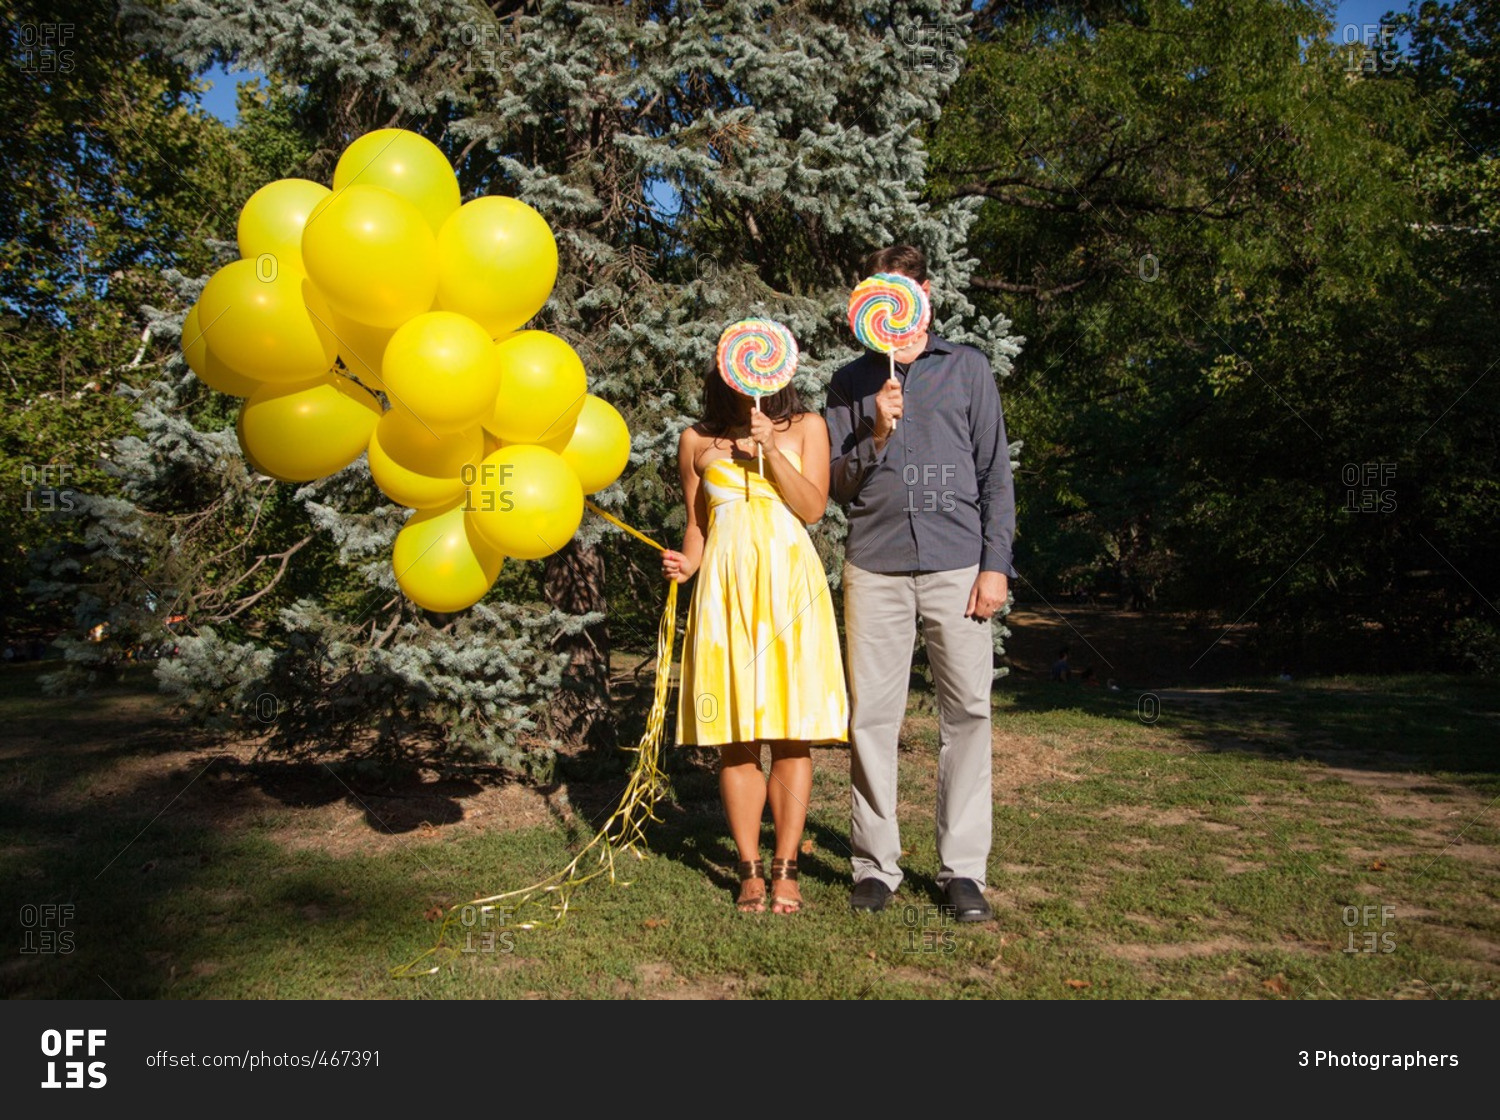 Couple standing in Central Park holding lollipops in front of their faces and yellow balloons